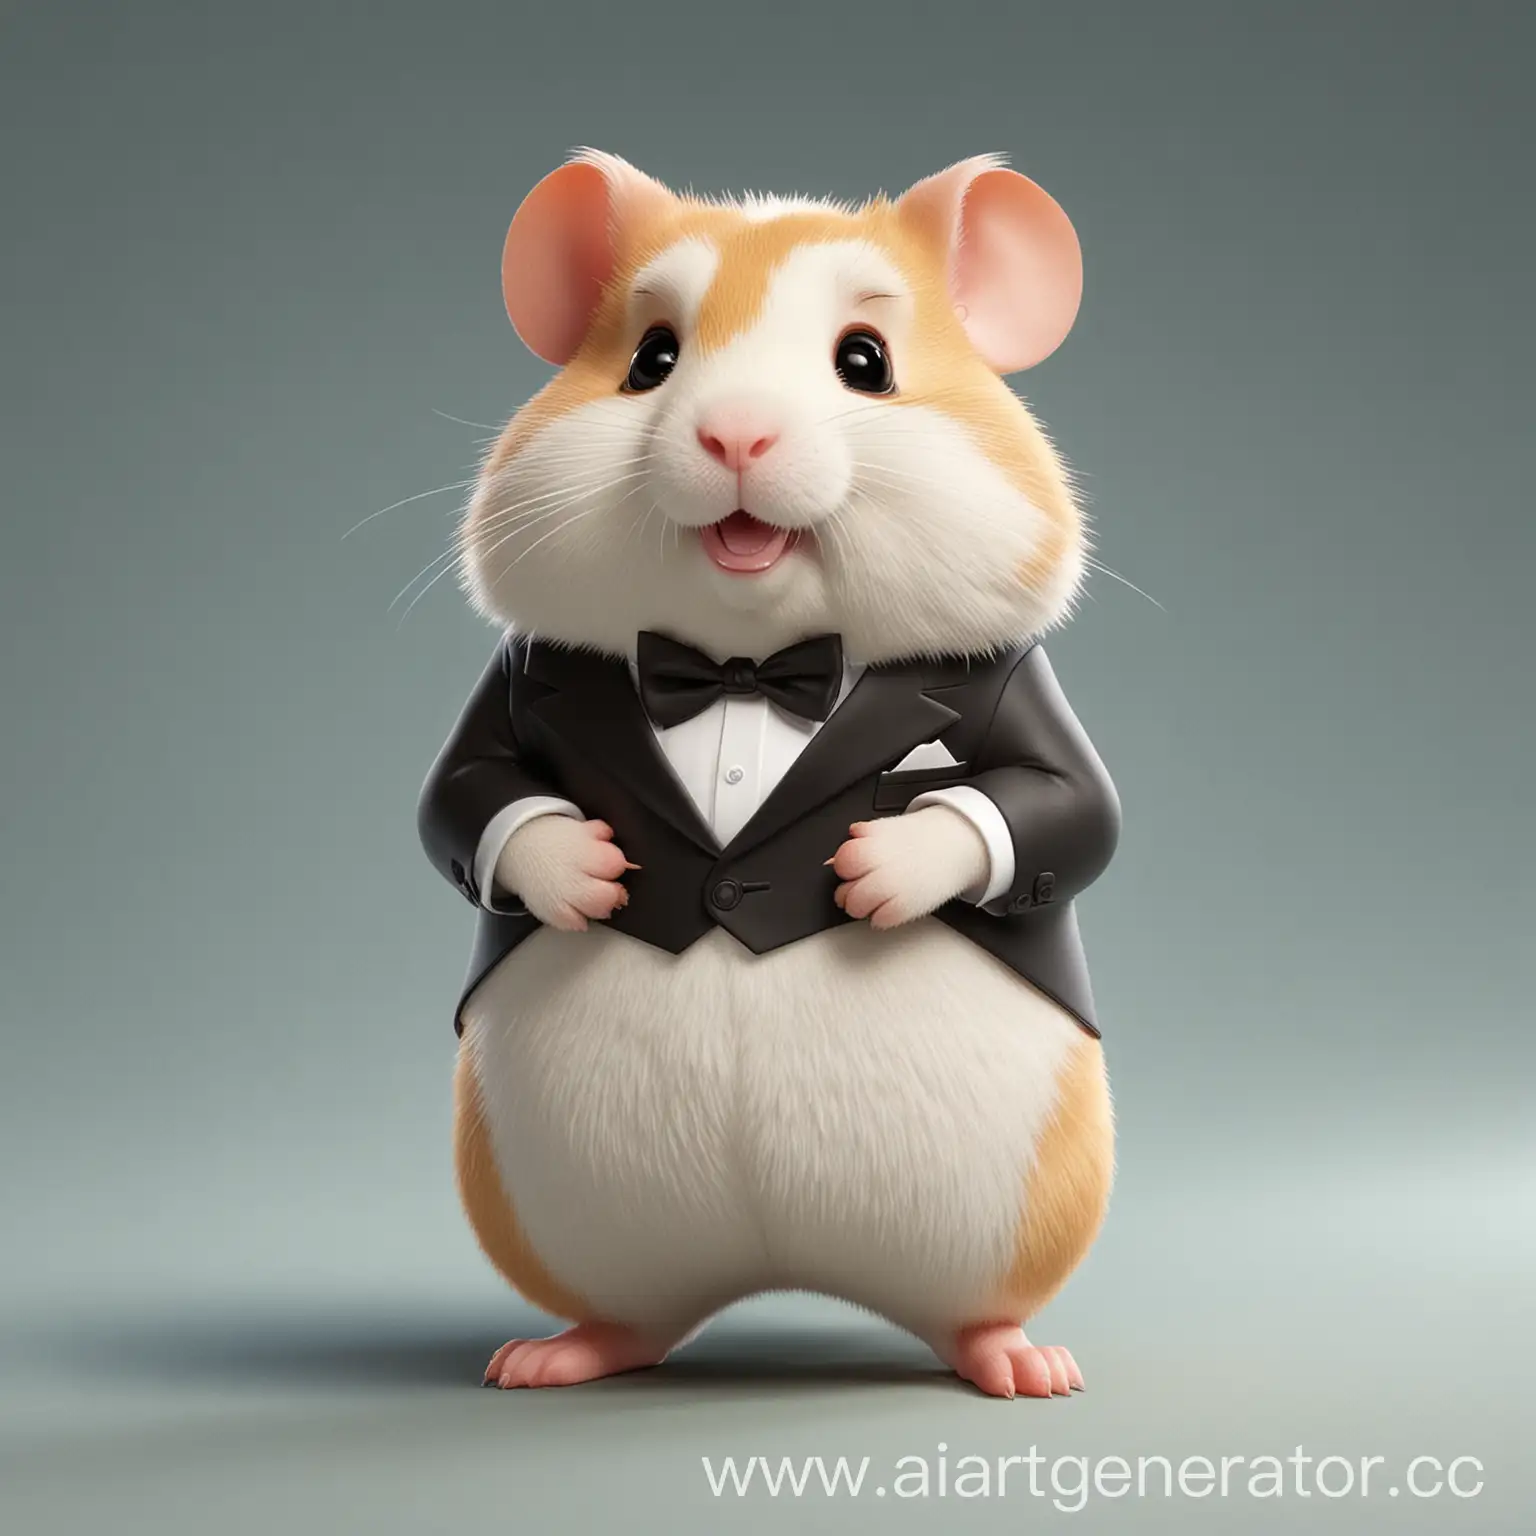 Energetic-Hamster-in-Tuxedo-3D-Cartoon-Illustration-with-Realistic-Touch